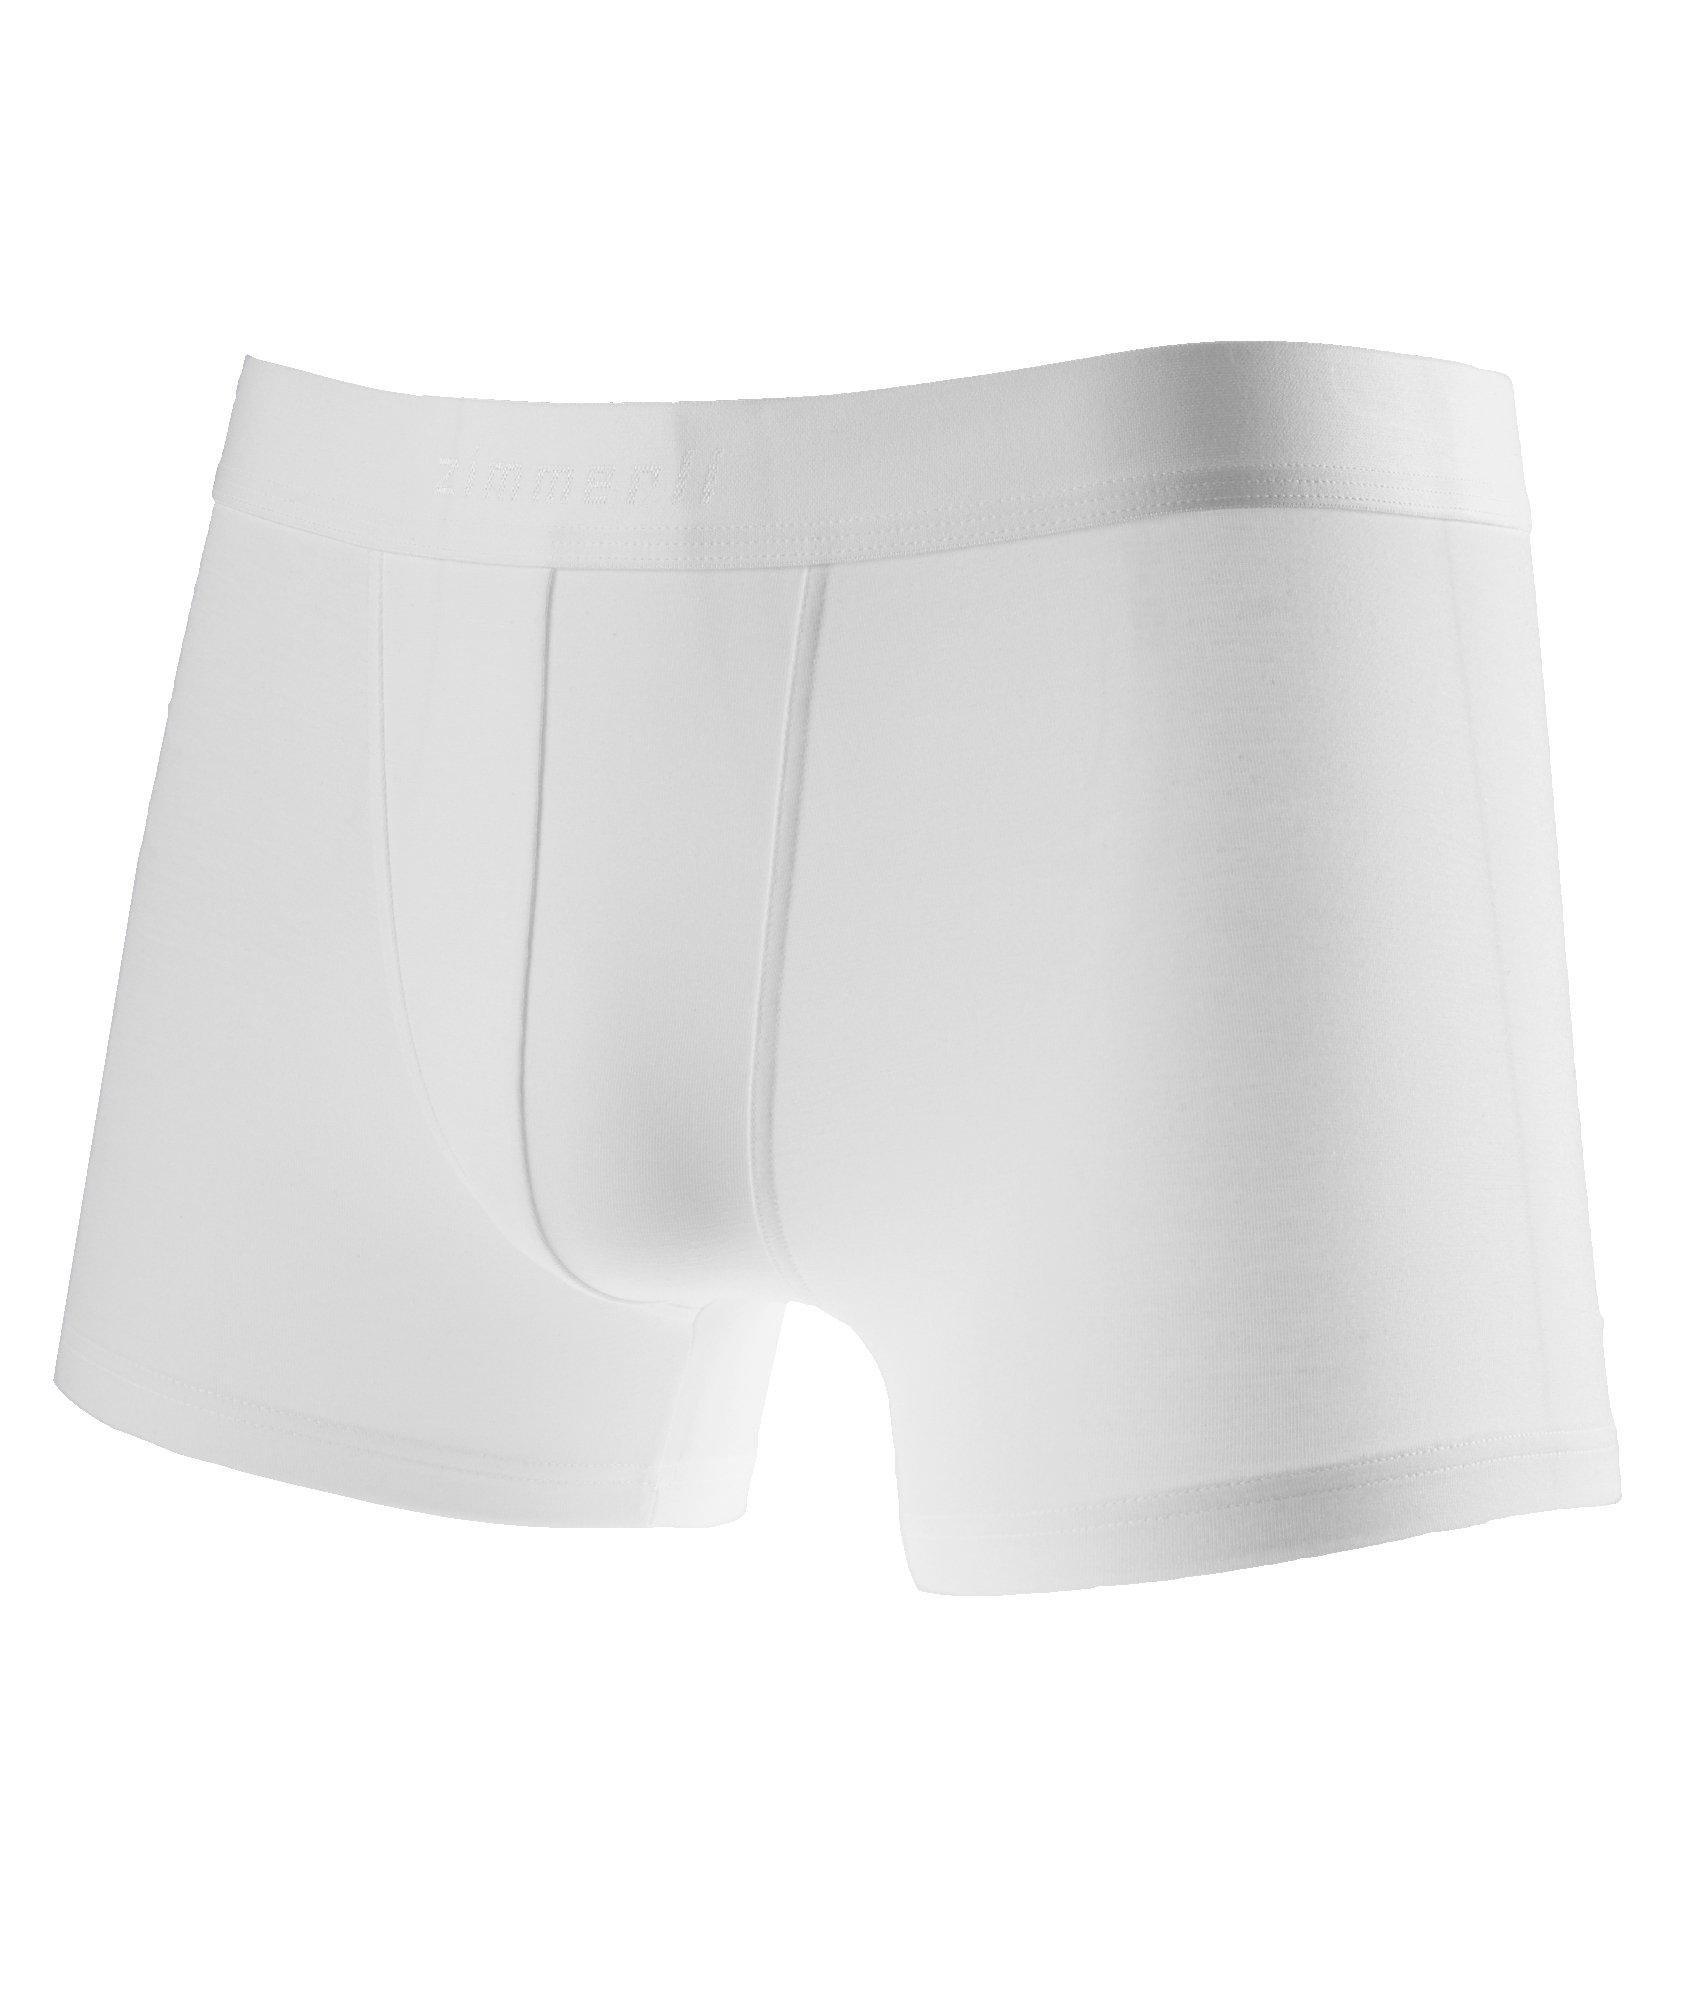 700 Pureness Boxer Briefs image 0